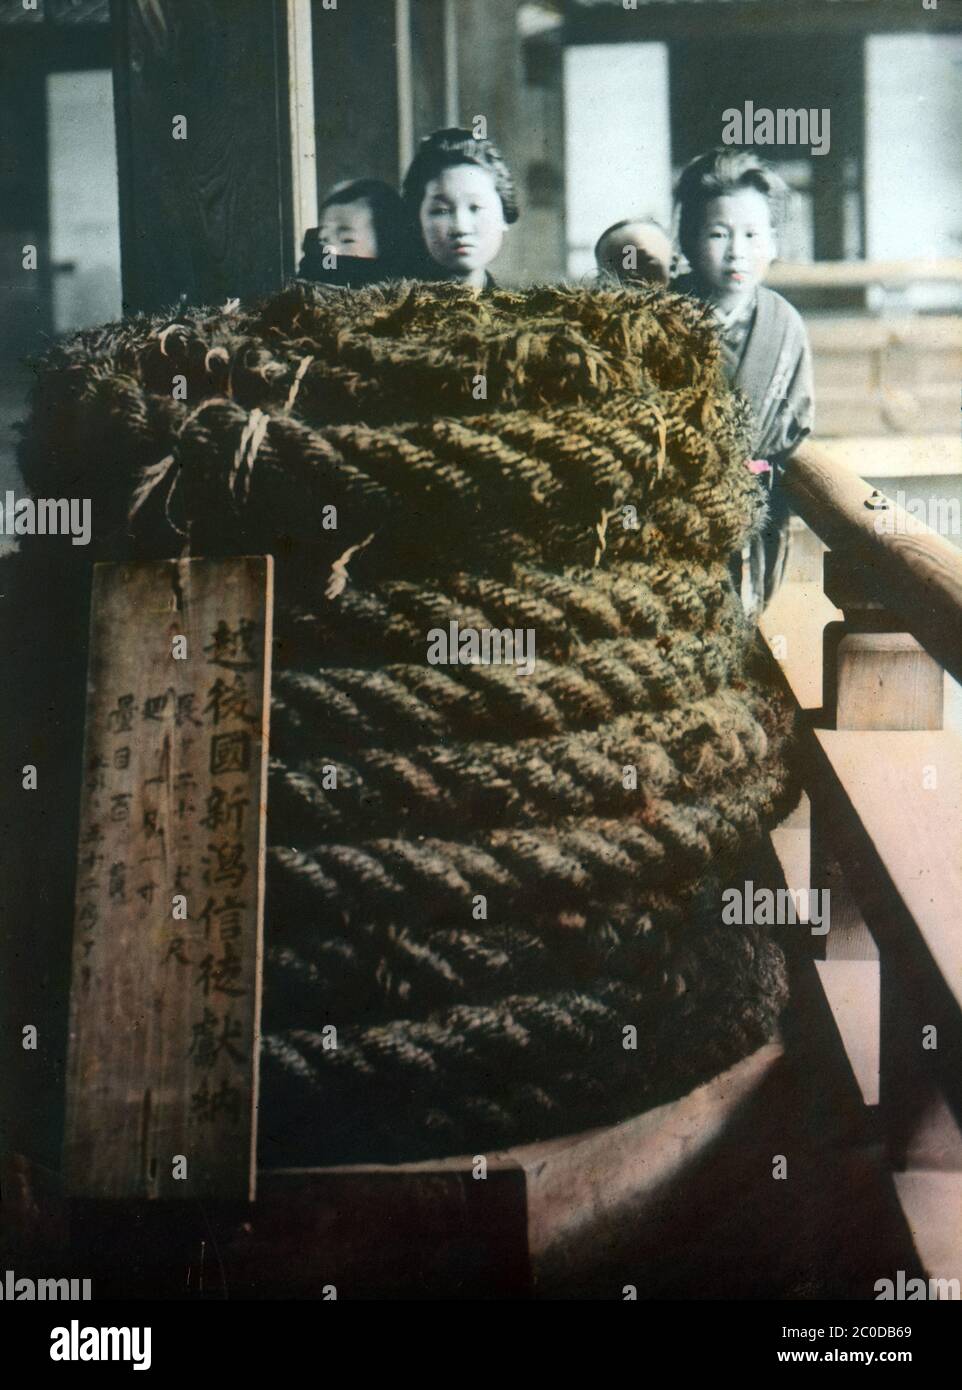 [ 1900s Japan - Rope of Human Hair ] — Two Japanese girls and their charges behind a huge coiled rope, made from human hair, at Higashi Honganji Temple in Kyoto.  During the reconstruction of the temple in 1895 (Meiji 28), there was no rope strong enough to hoist the temple’s massive wooden beams.  In response, female devotees cut off their hair and braided it into strong and thick ropes.  To this day, the rope is still on display, albeit now in a glass case.  20th century vintage glass slide. Stock Photo